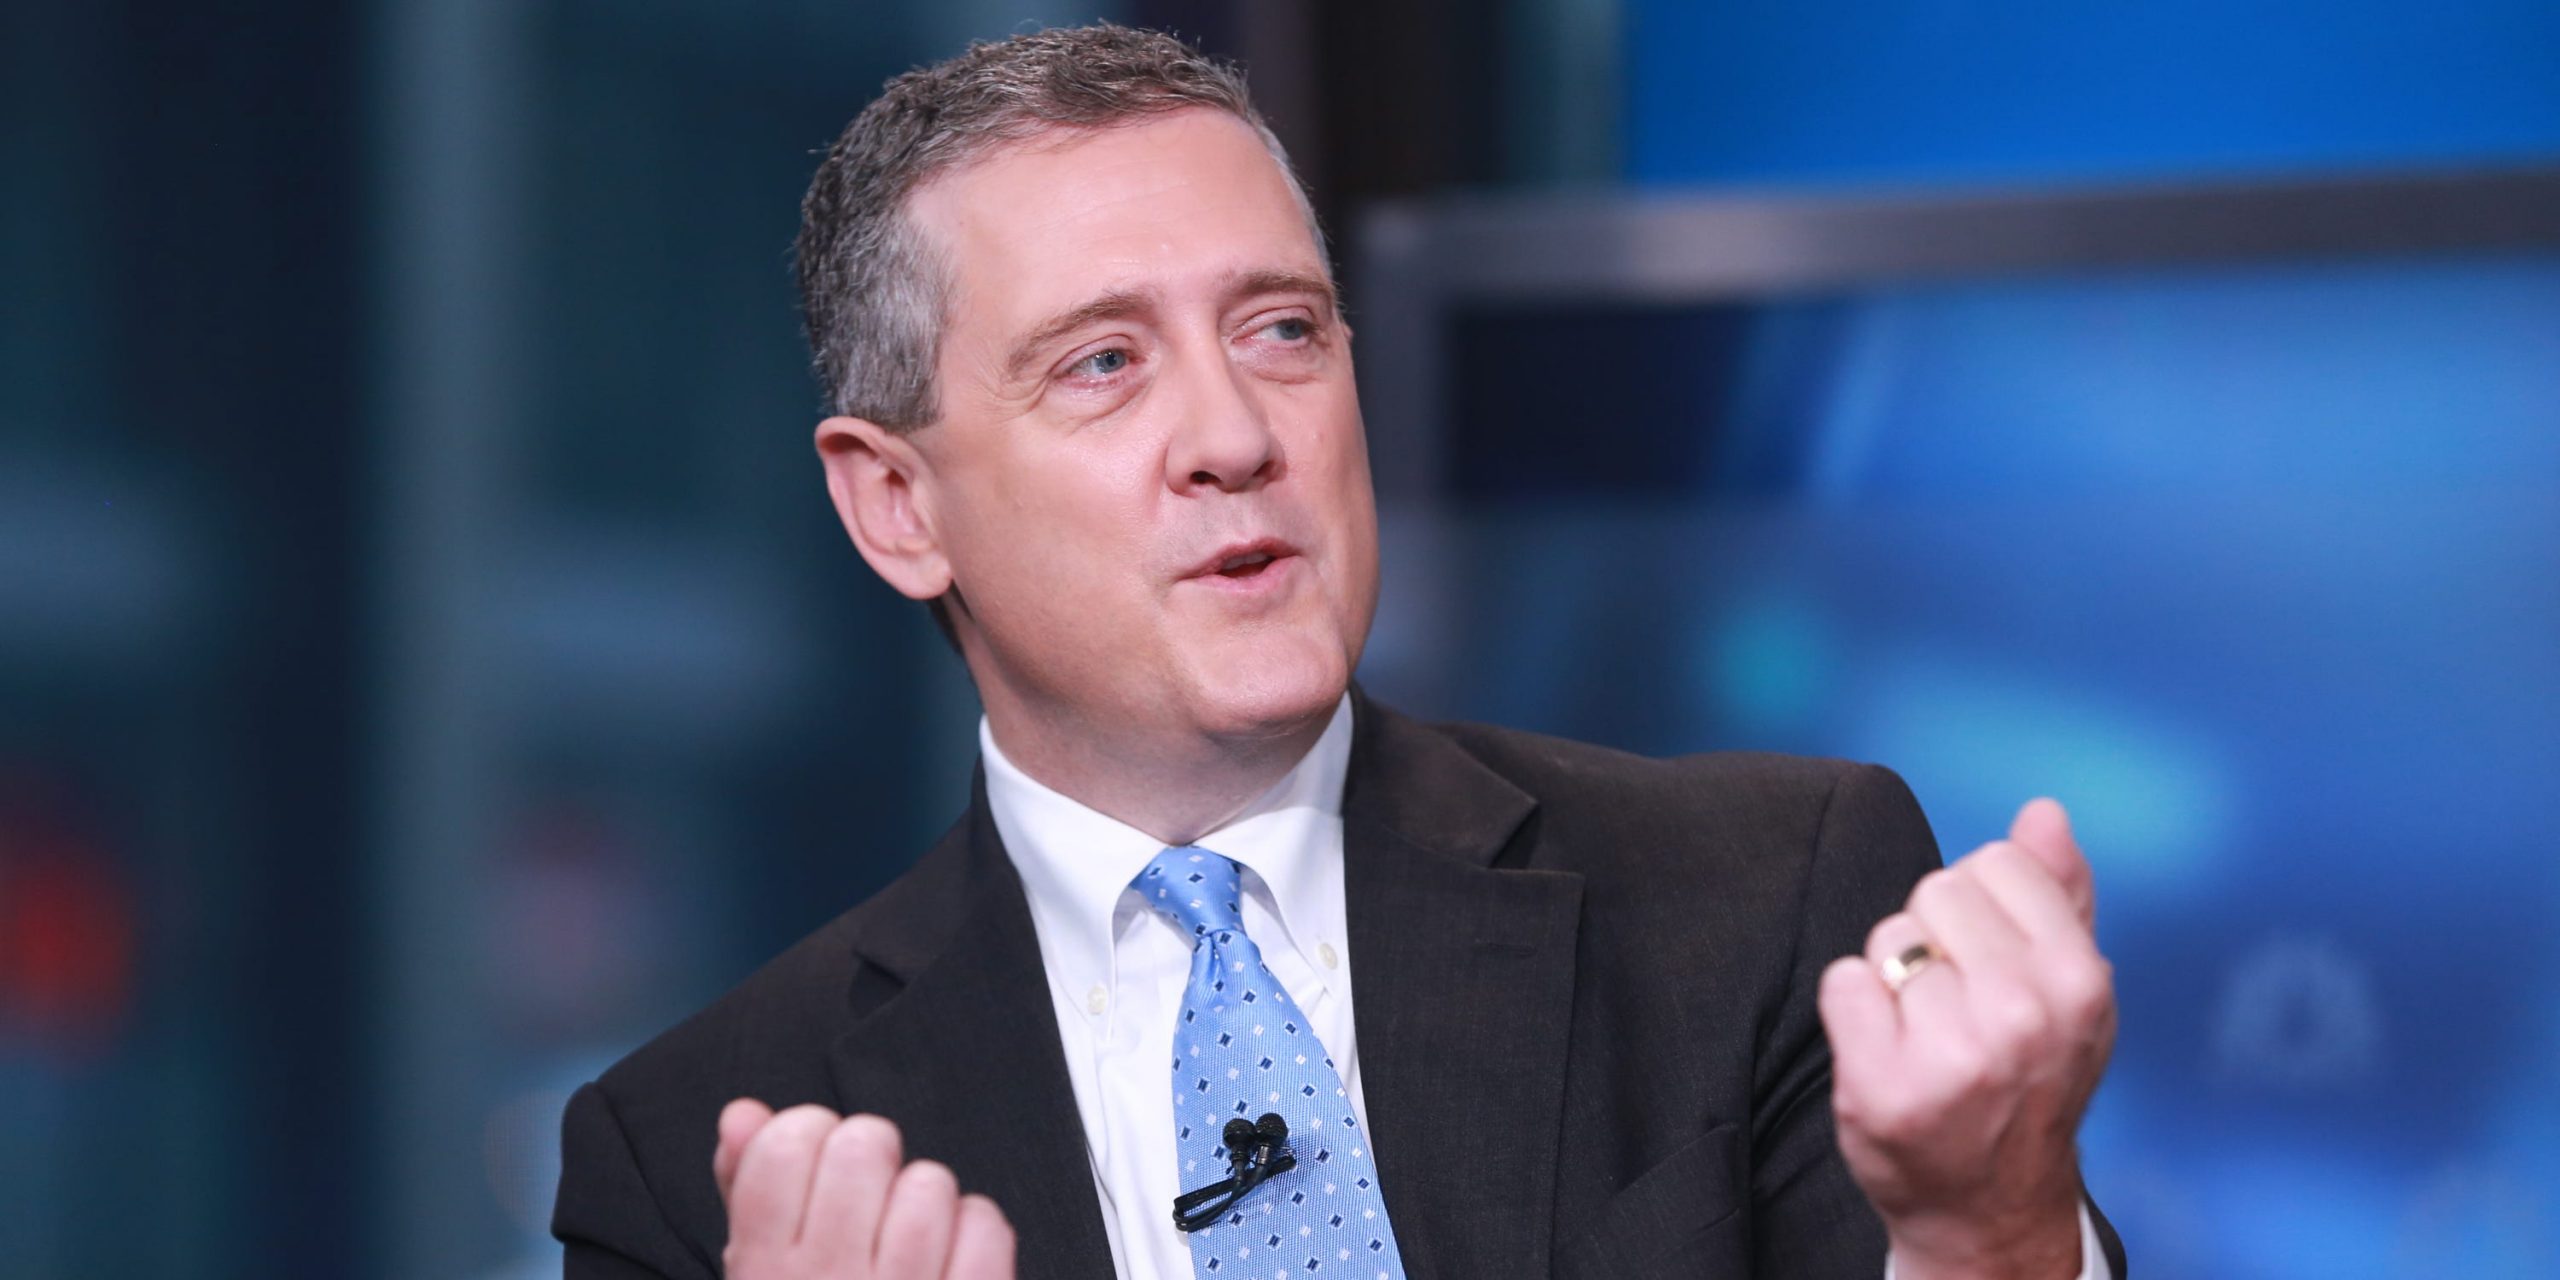 James Bullard, CEO and president of the Federal Reserve Bank of St. Louis, in an interview on February 25, 2016.